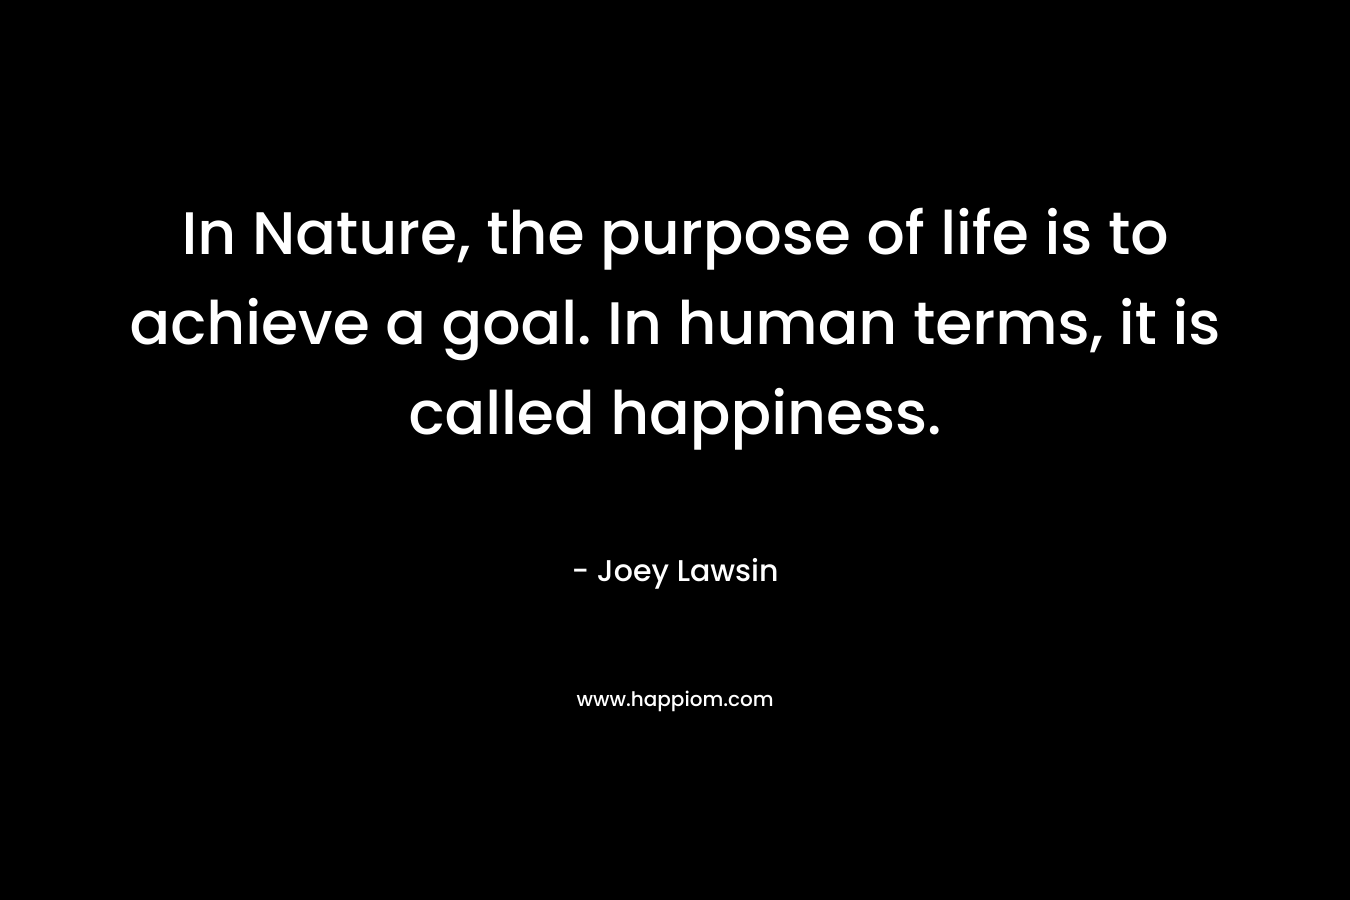 In Nature, the purpose of life is to achieve a goal. In human terms, it is called happiness. – Joey Lawsin